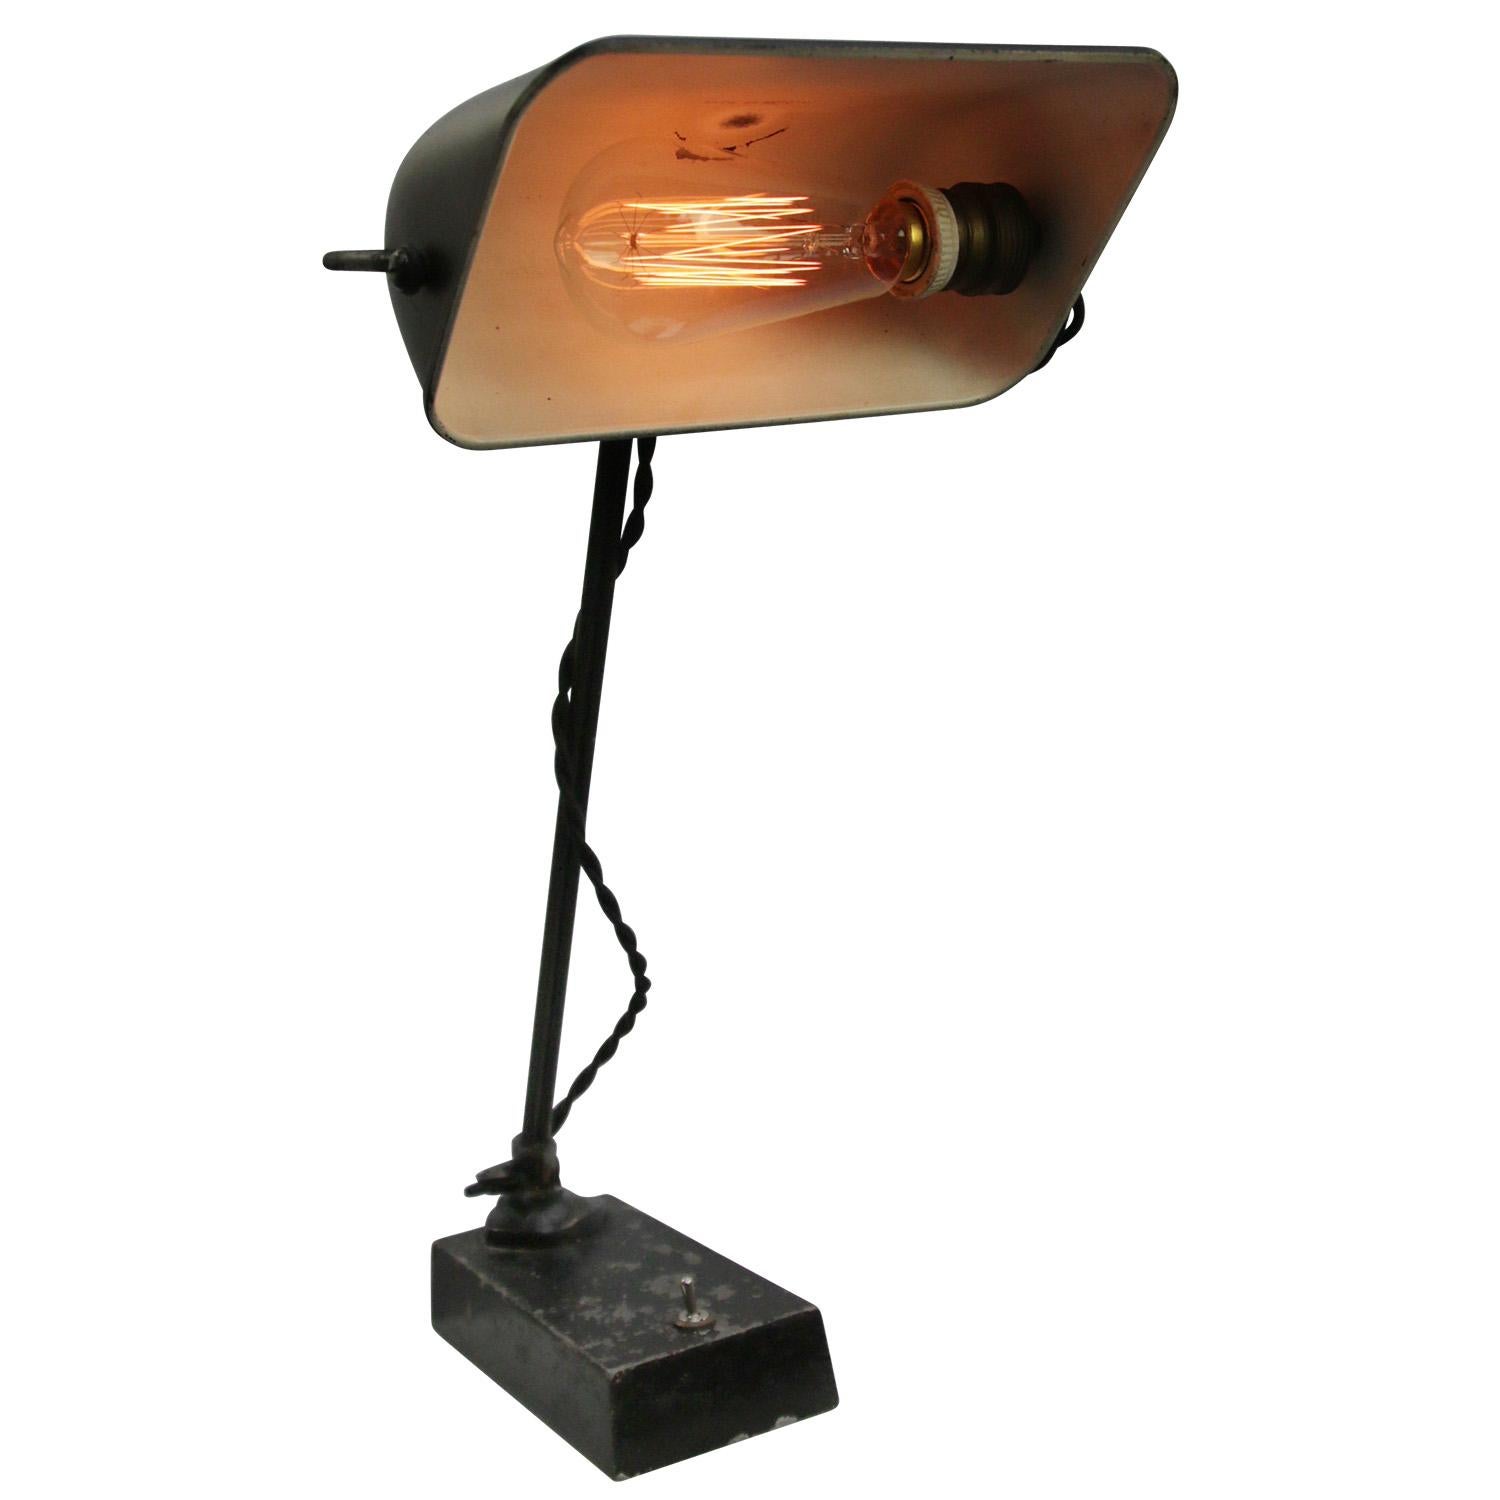 Belgian black Bakelite desk light by Erpe
2,5 meter black cotton flex, plug and switch in base

Also available with US/UK plug

Weight: 2.10 kg / 4.6 lb

Priced per individual item. All lamps have been made suitable by international standards